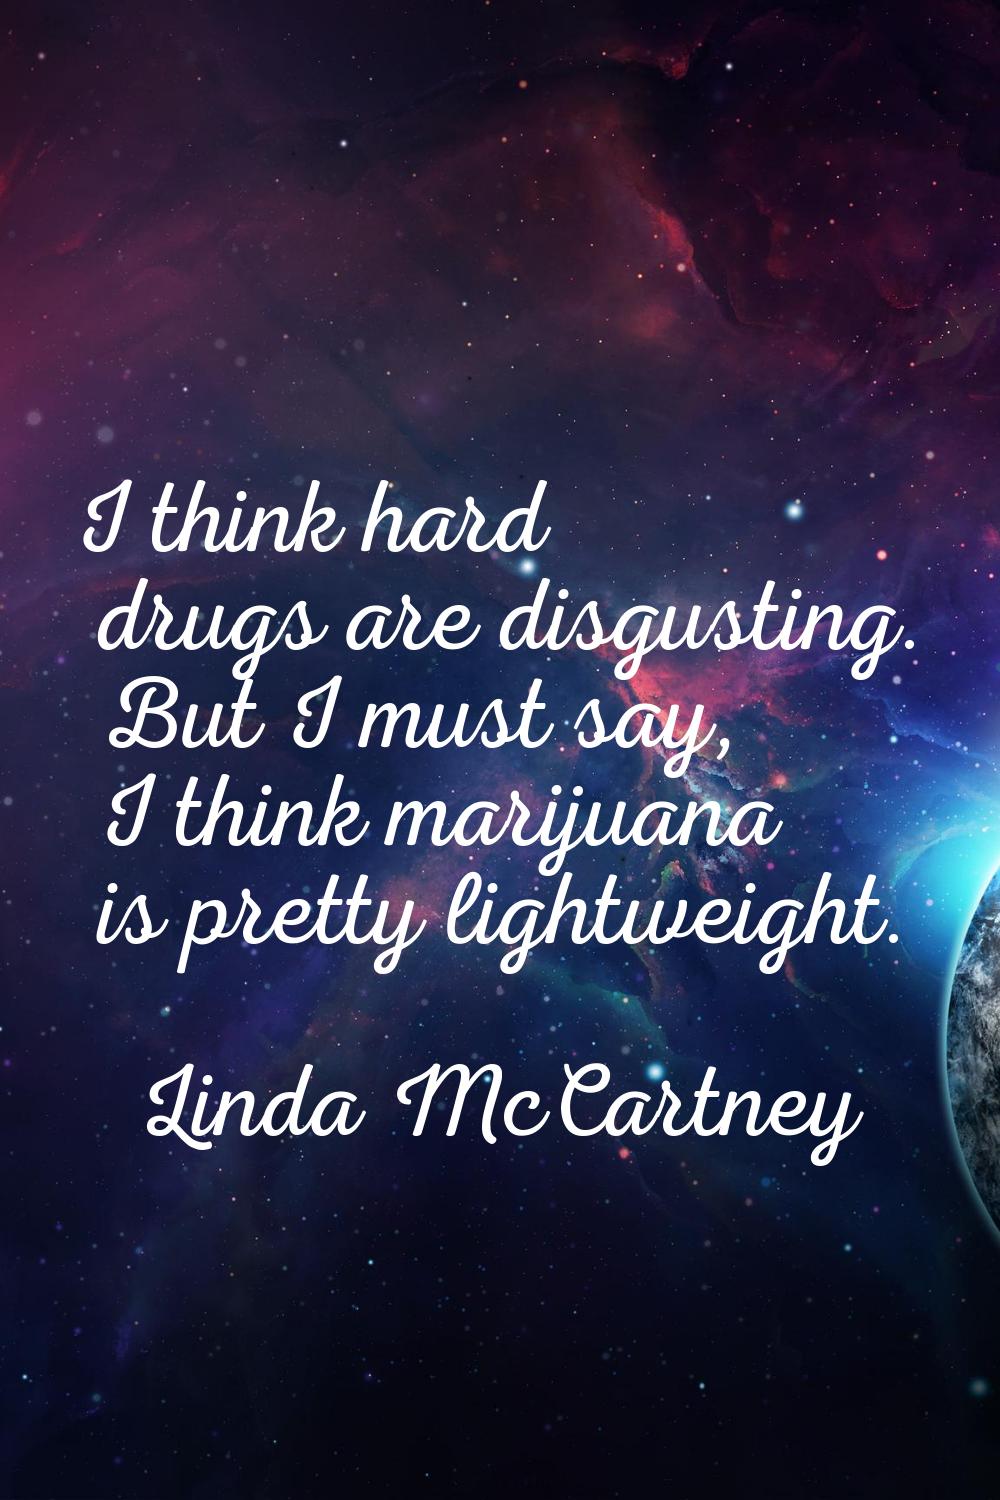 I think hard drugs are disgusting. But I must say, I think marijuana is pretty lightweight.